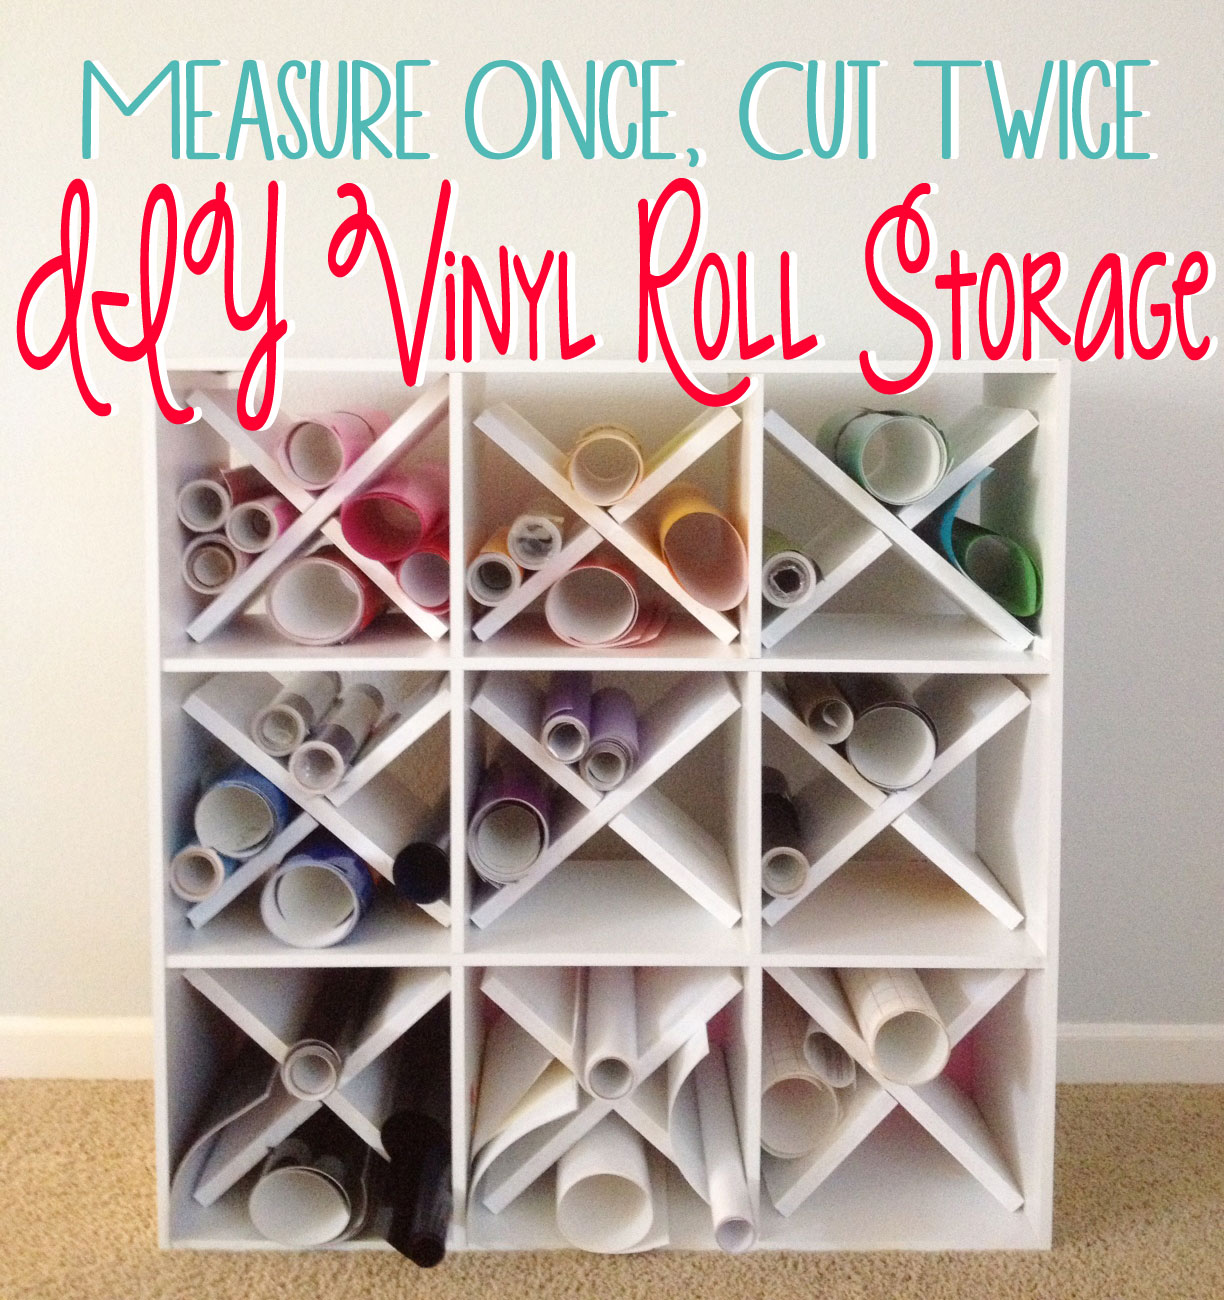 Homemade Do It Yourself crafting Vinyl Roller 